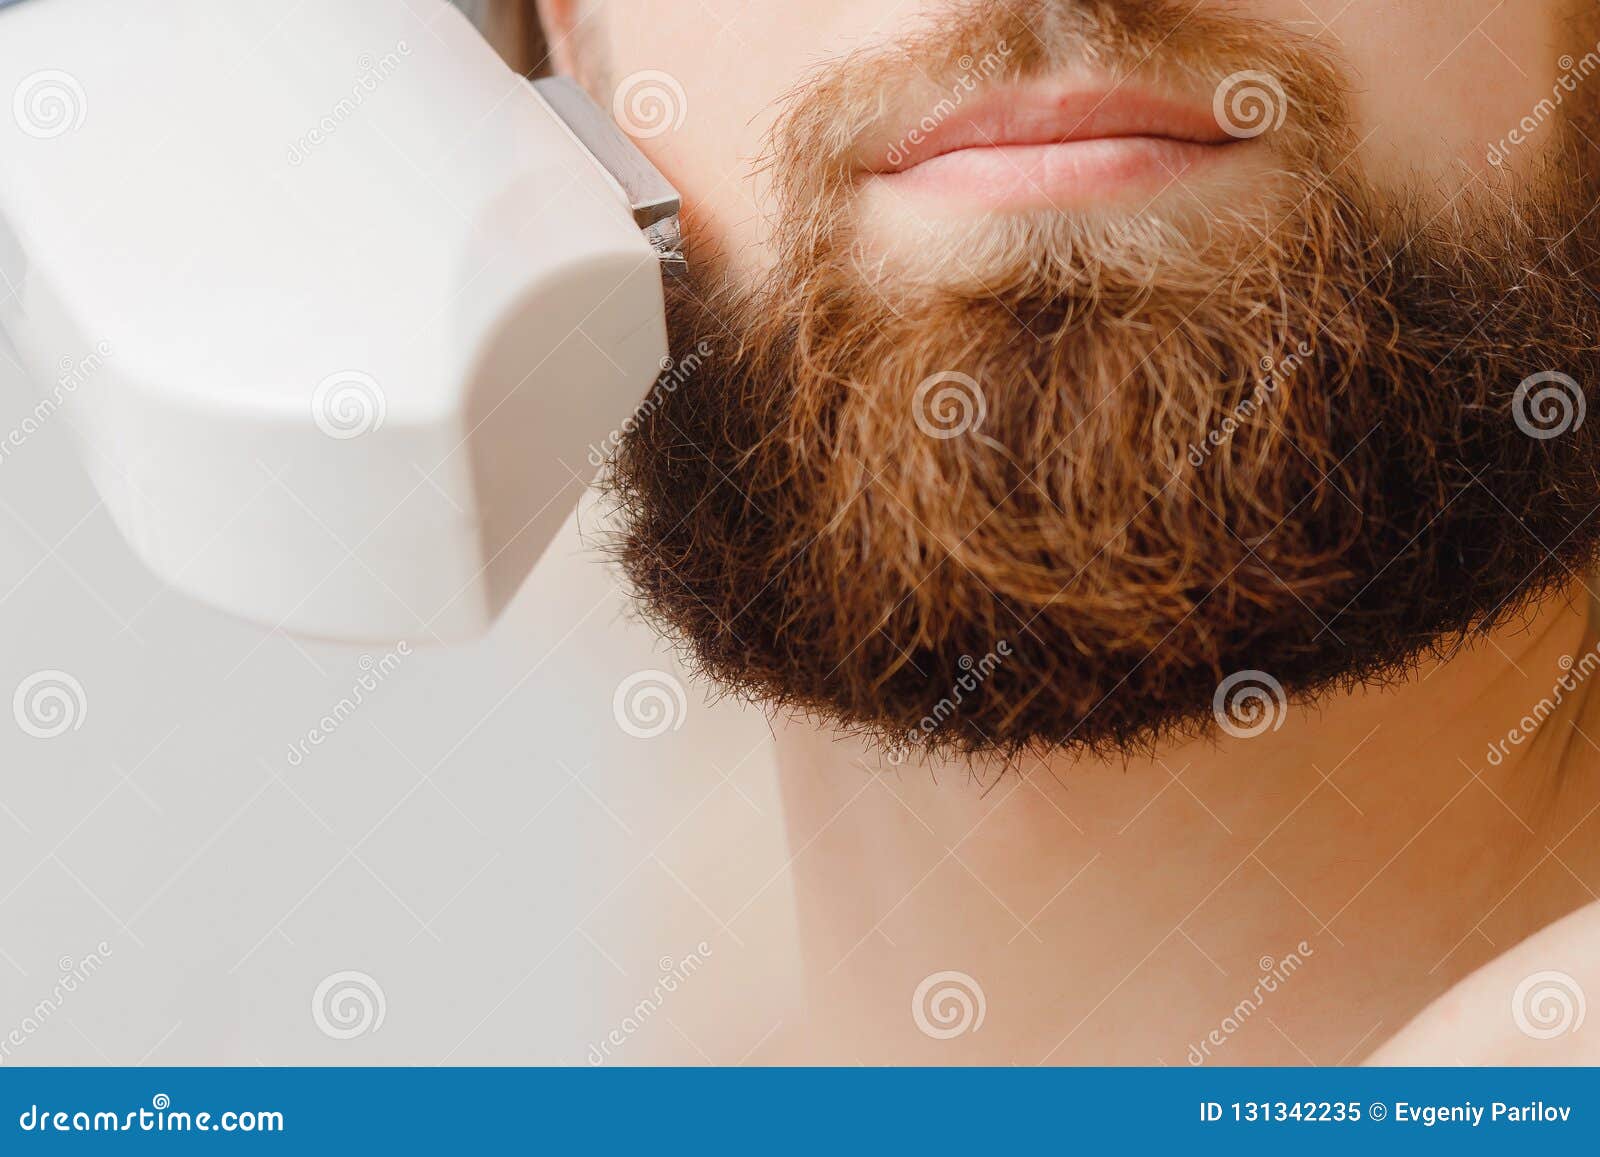 Male Depilation Laser Hair Removal Beard and Mustache Procedure Treatment  in Salon. Stock Image - Image of cosmetic, electrolysis: 131342235